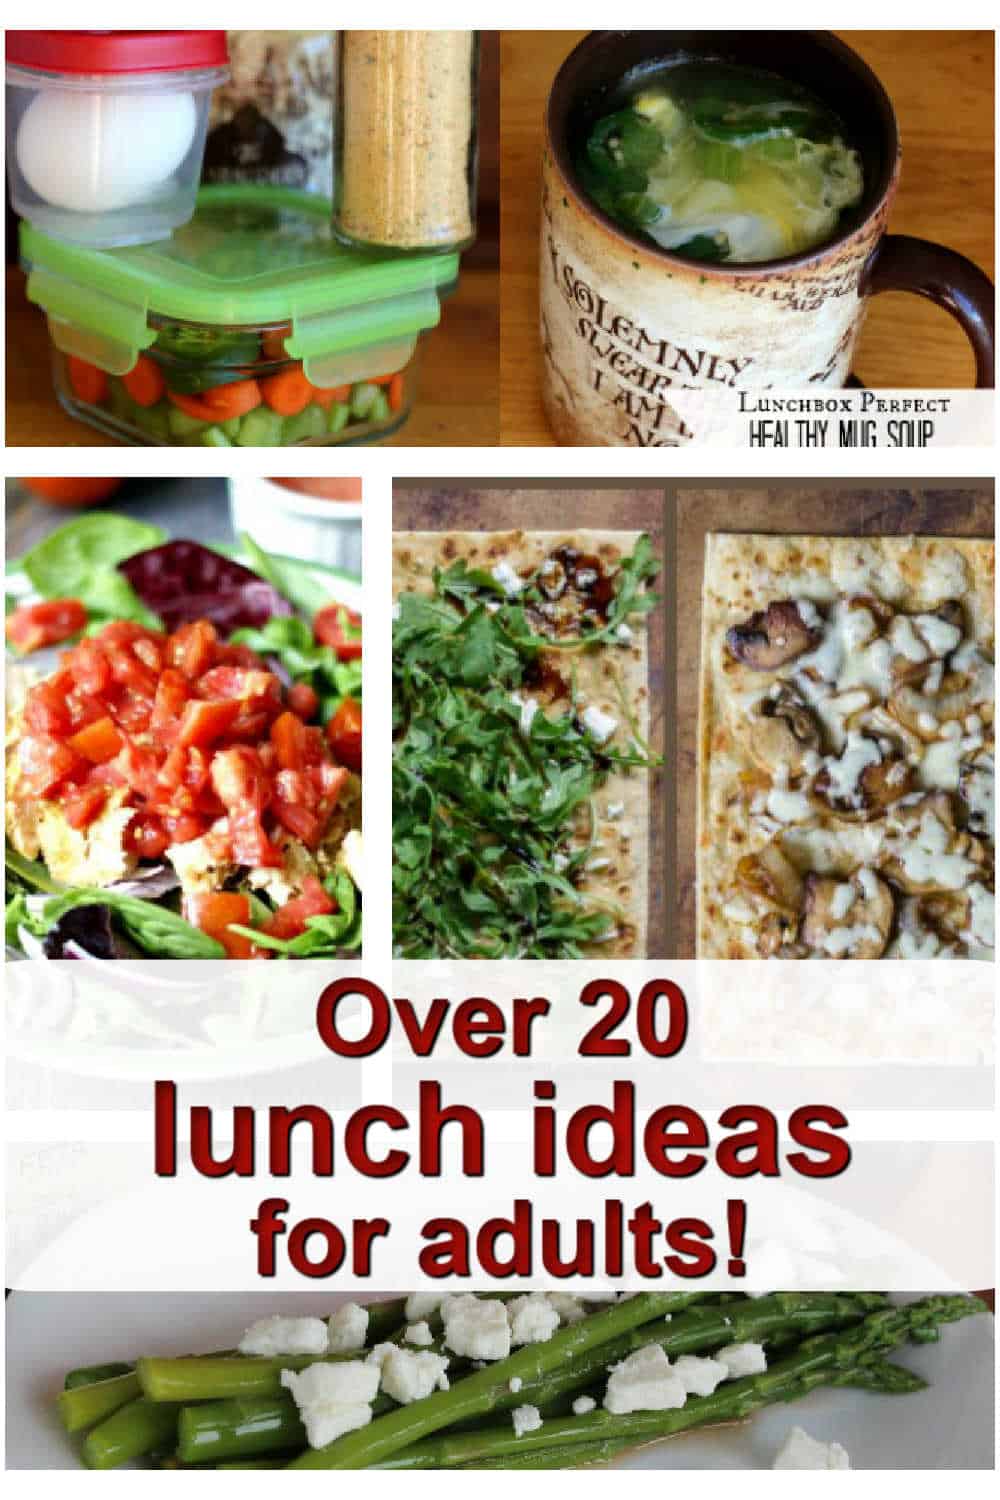 collage of lunch ideas including soup, a vegetable salad, an asparagus and feta salad and flatbread salad